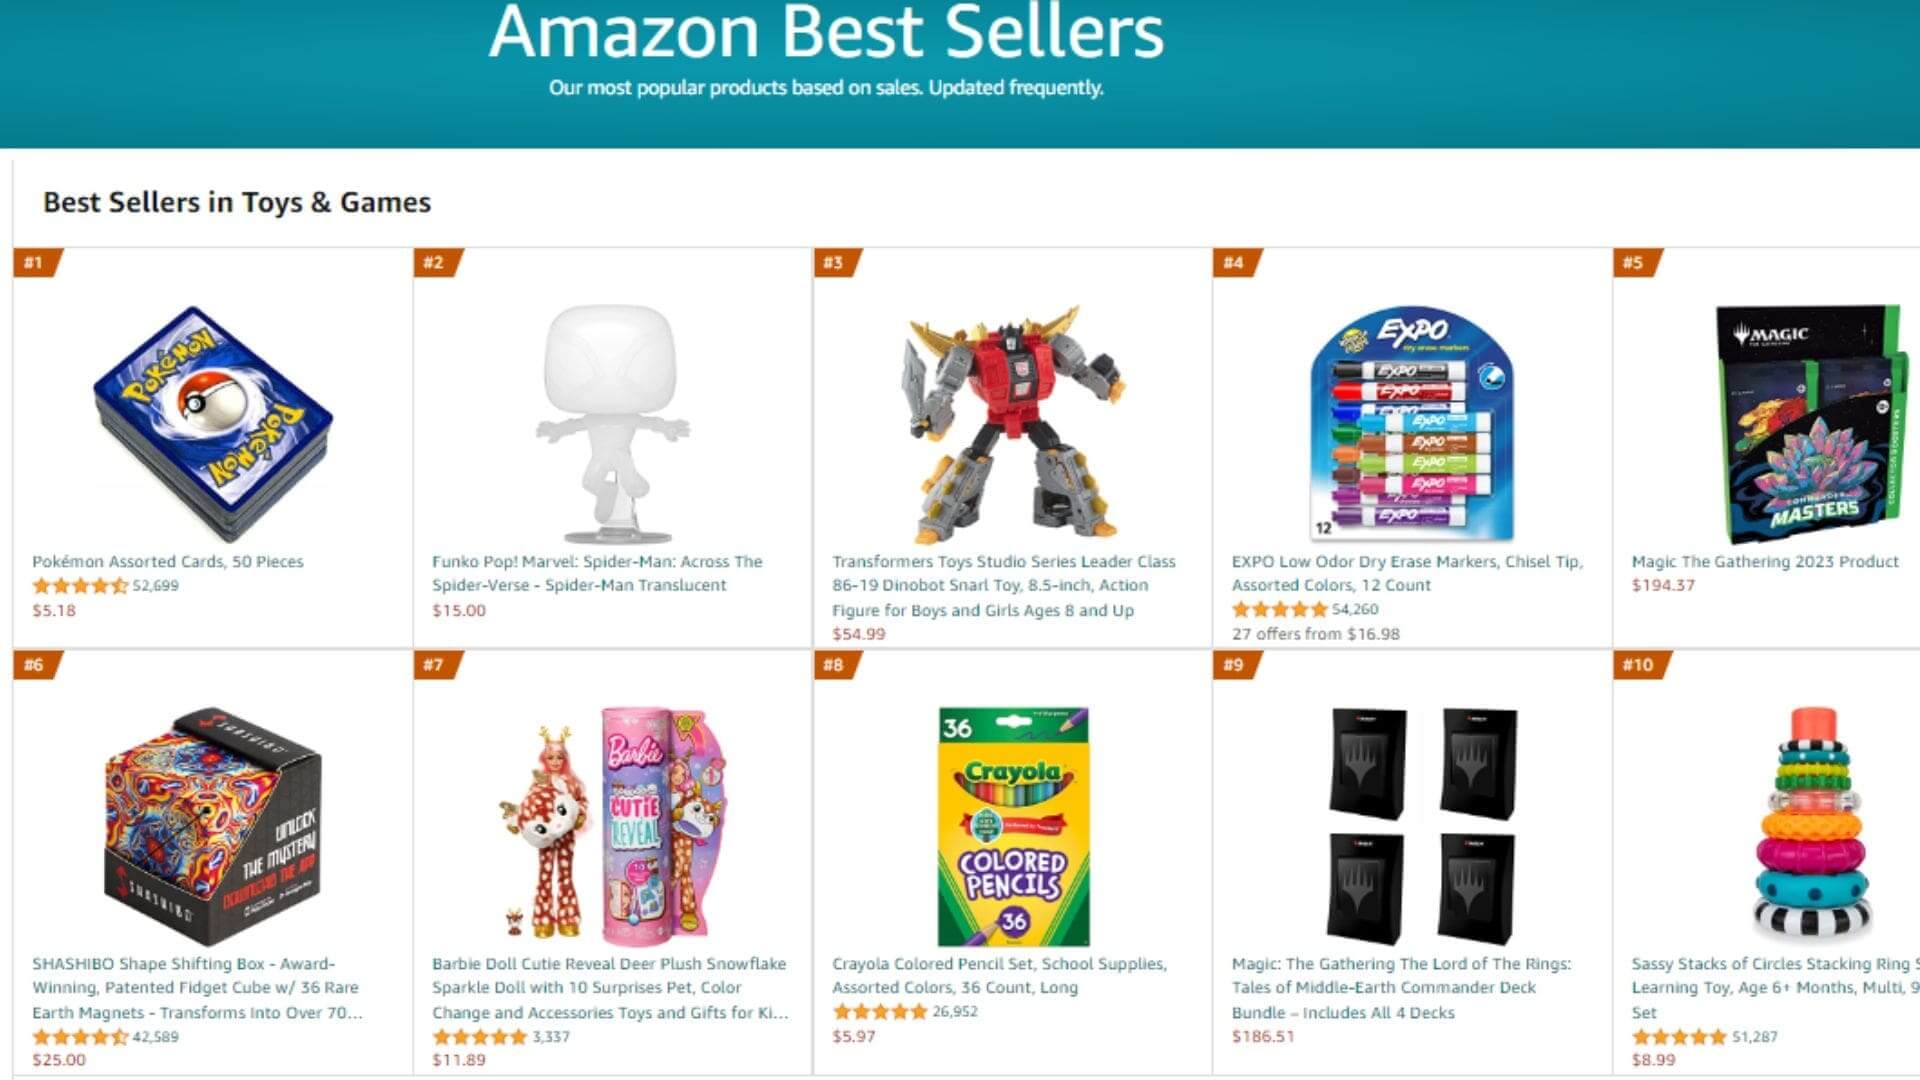 Most selling toys on Amazon